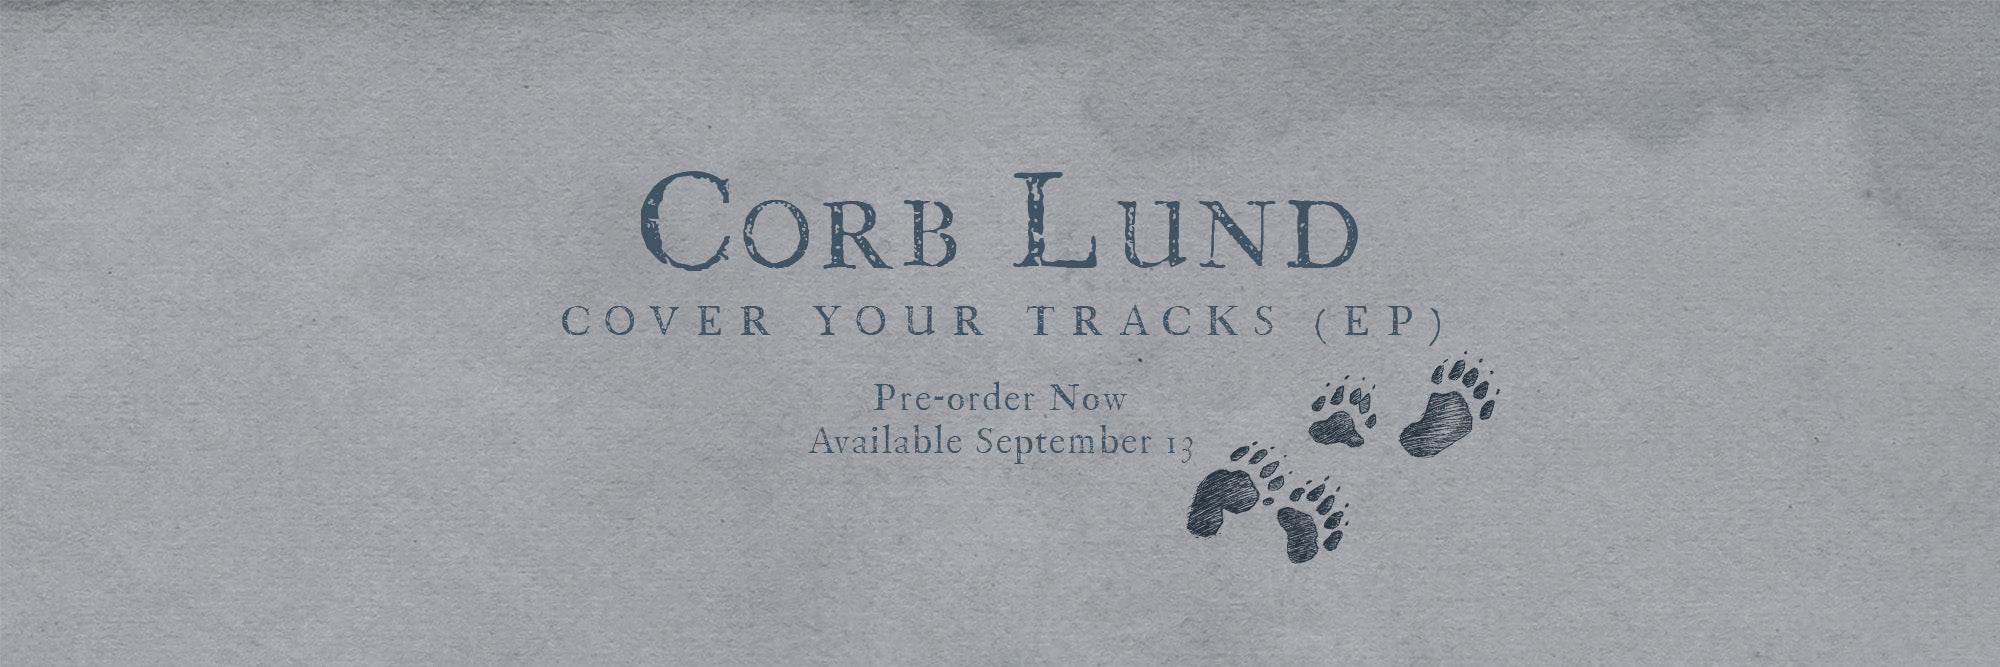 Corb Lund - Cover Your Tracks